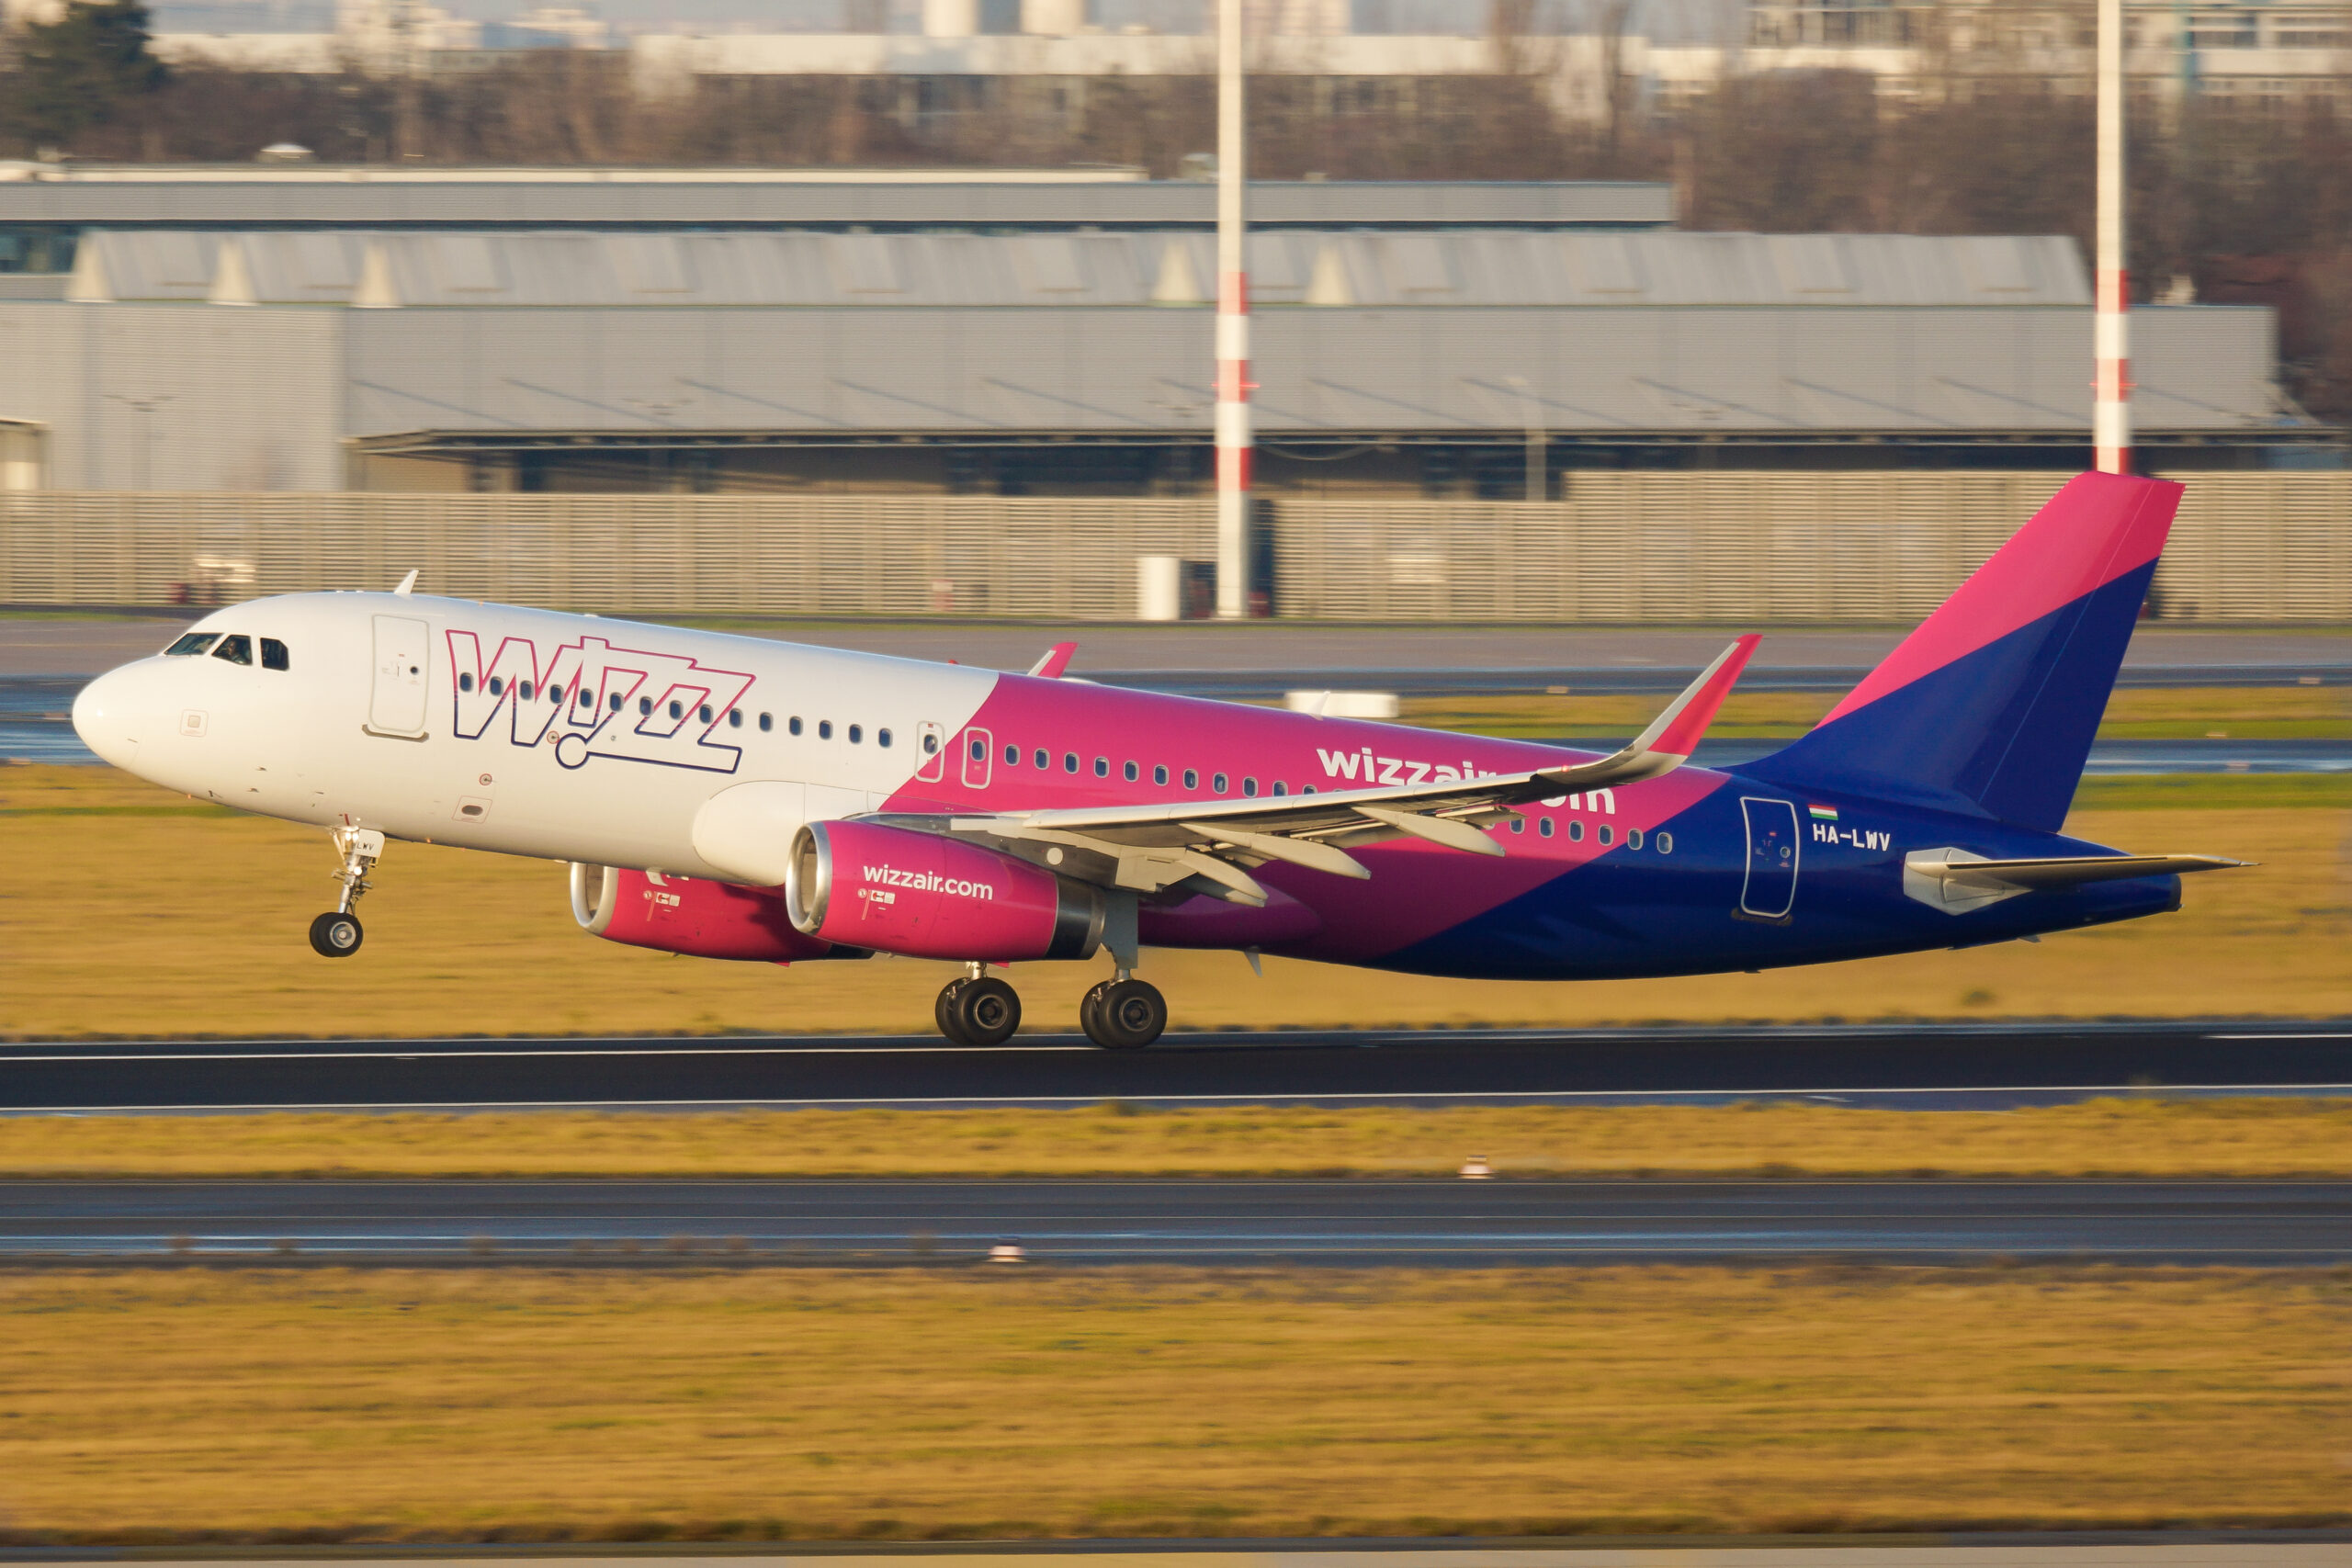 A Wizz Air Airbus lifts off the runway.